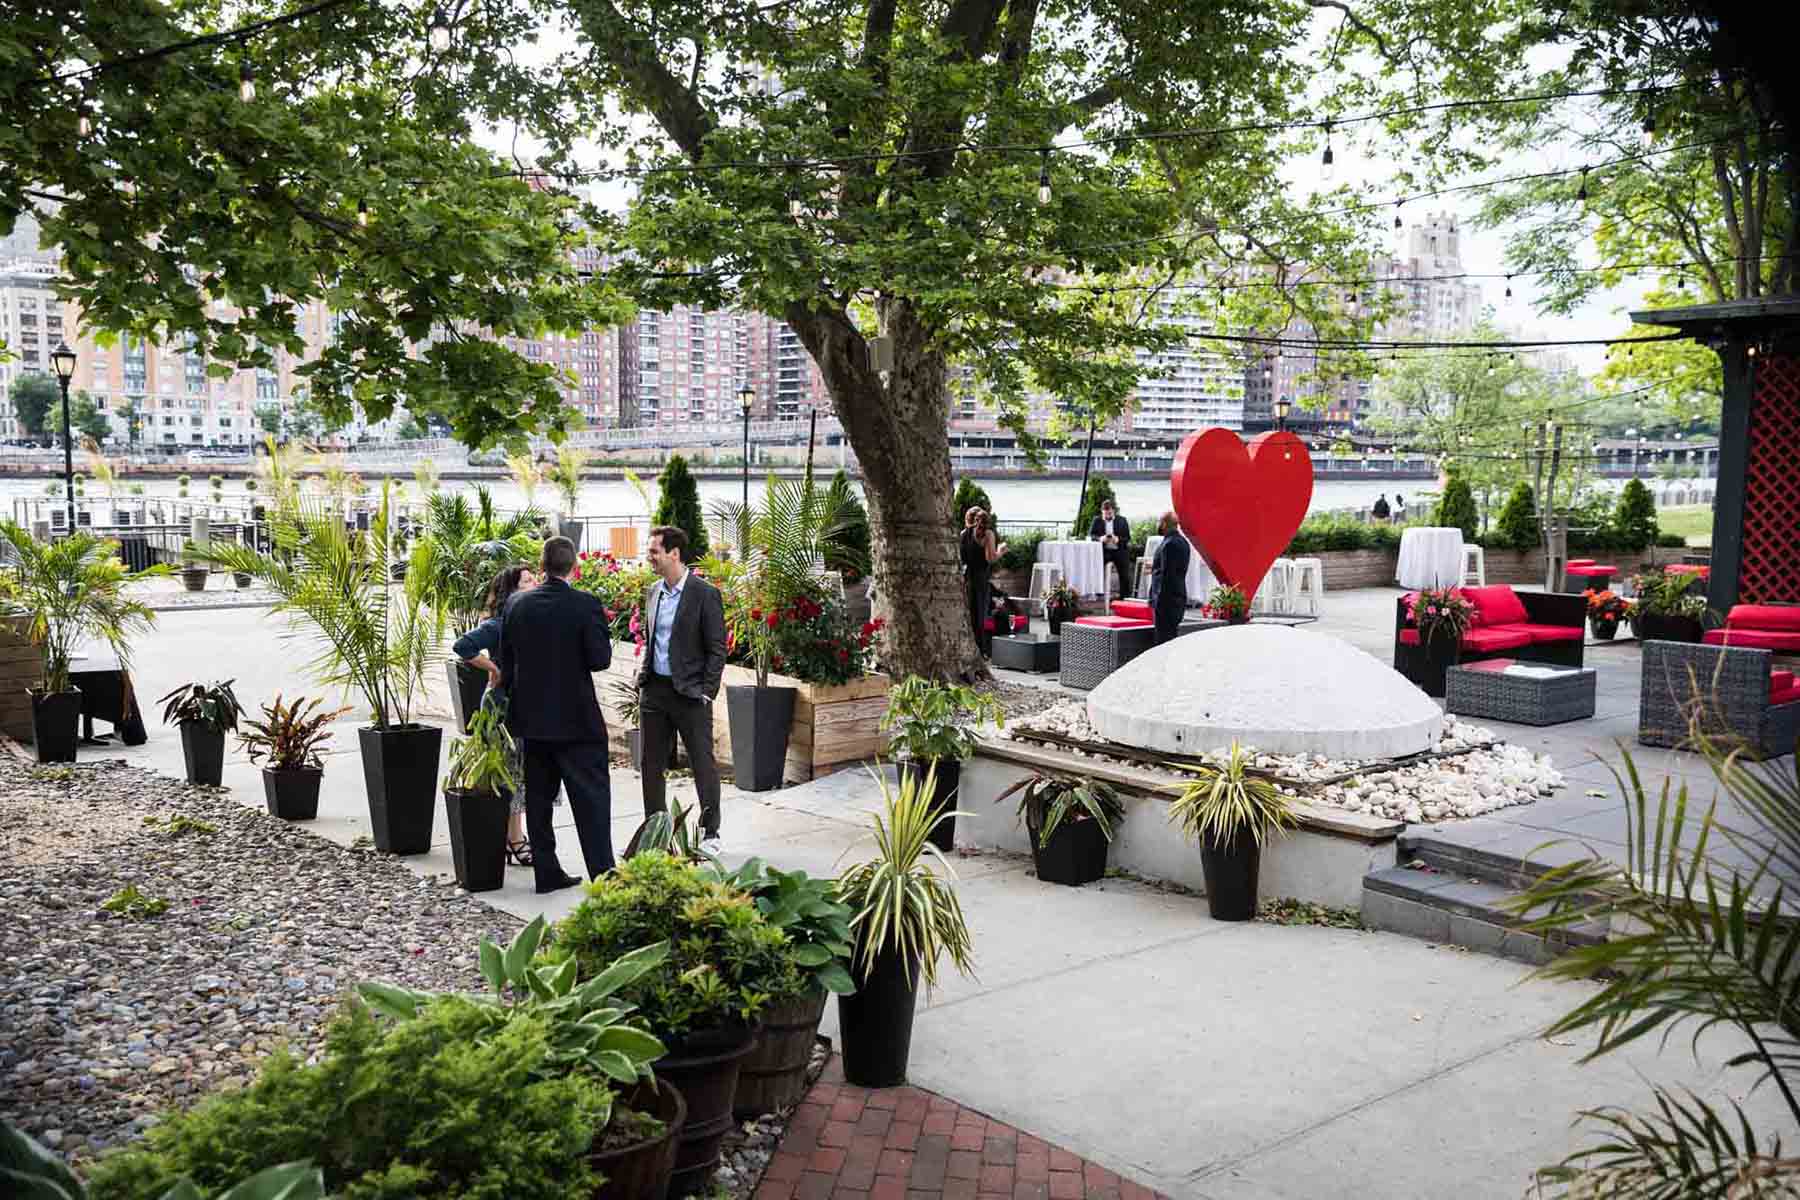 Guests talking on outdoor patio with red heart sculpture and plants at a Sanctuary Roosevelt Island wedding